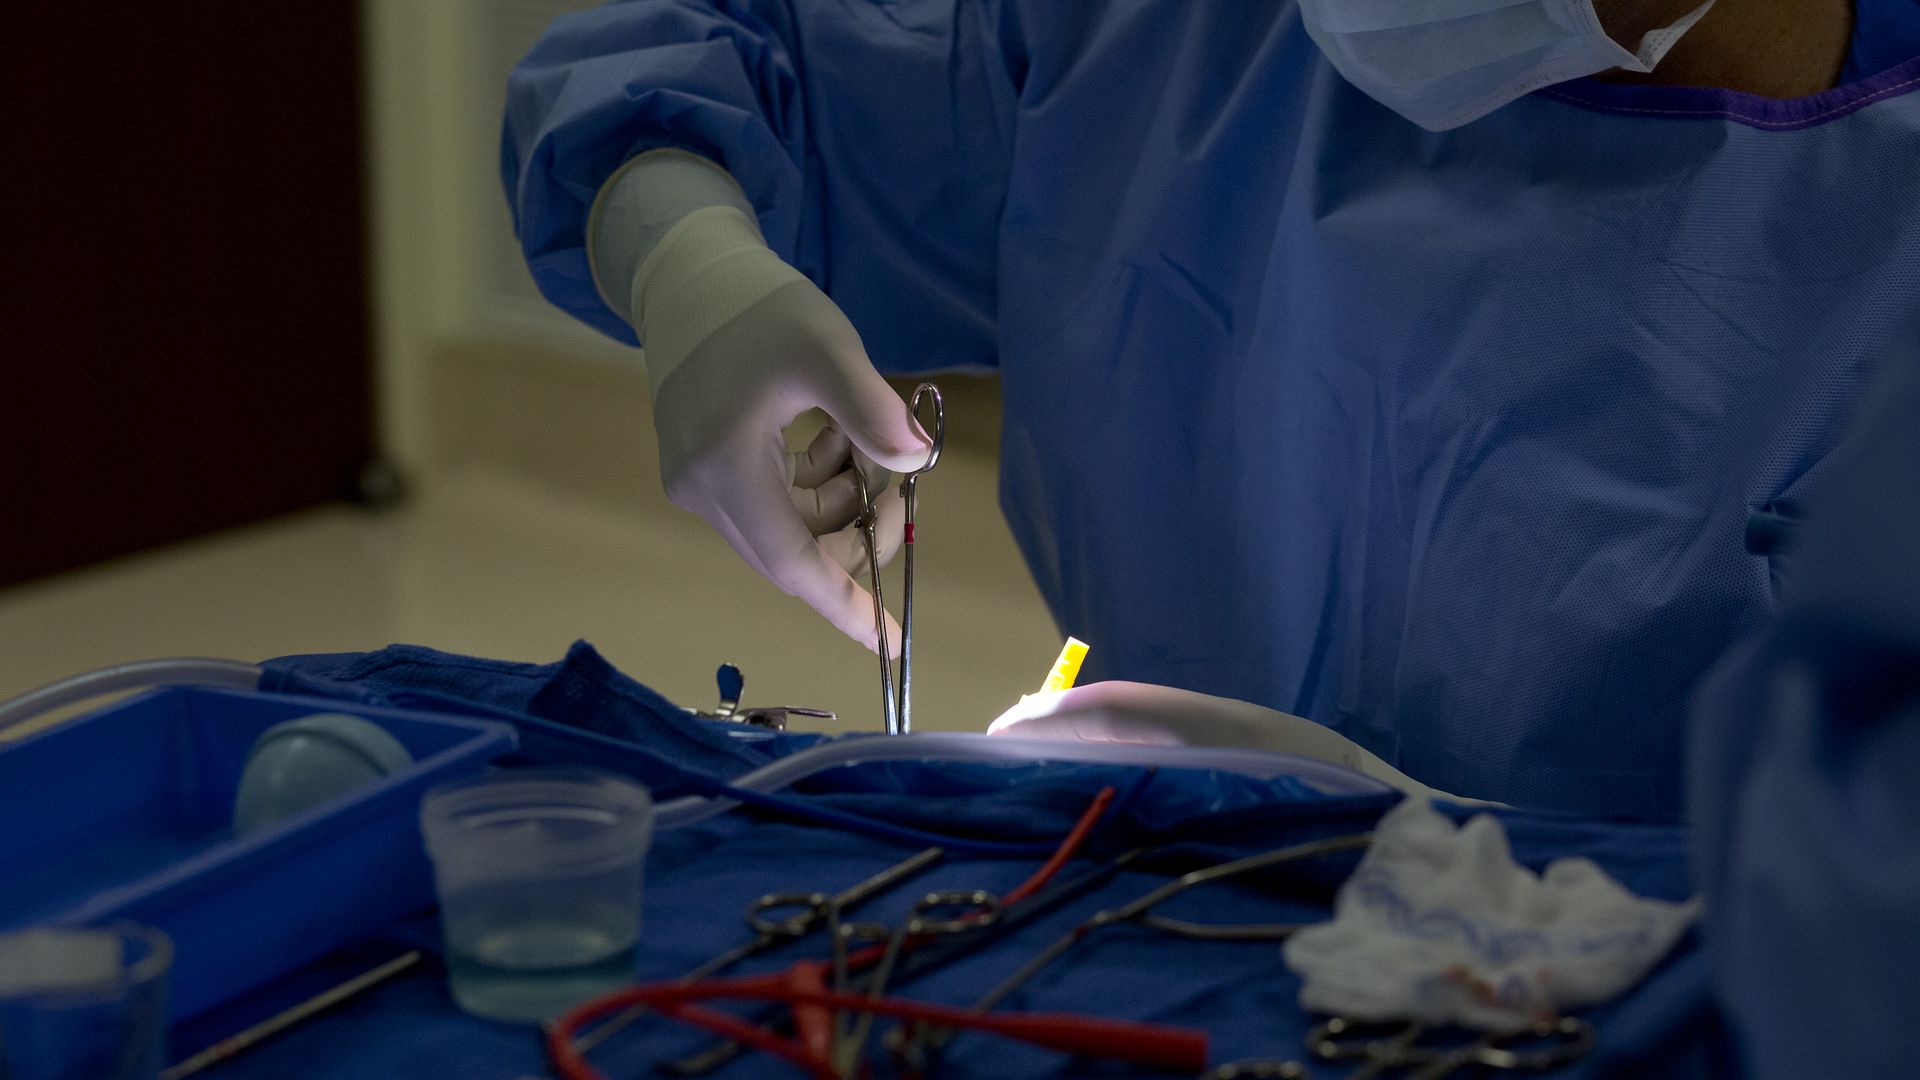 A doctor prepares for a surgery in a hospital operating room.